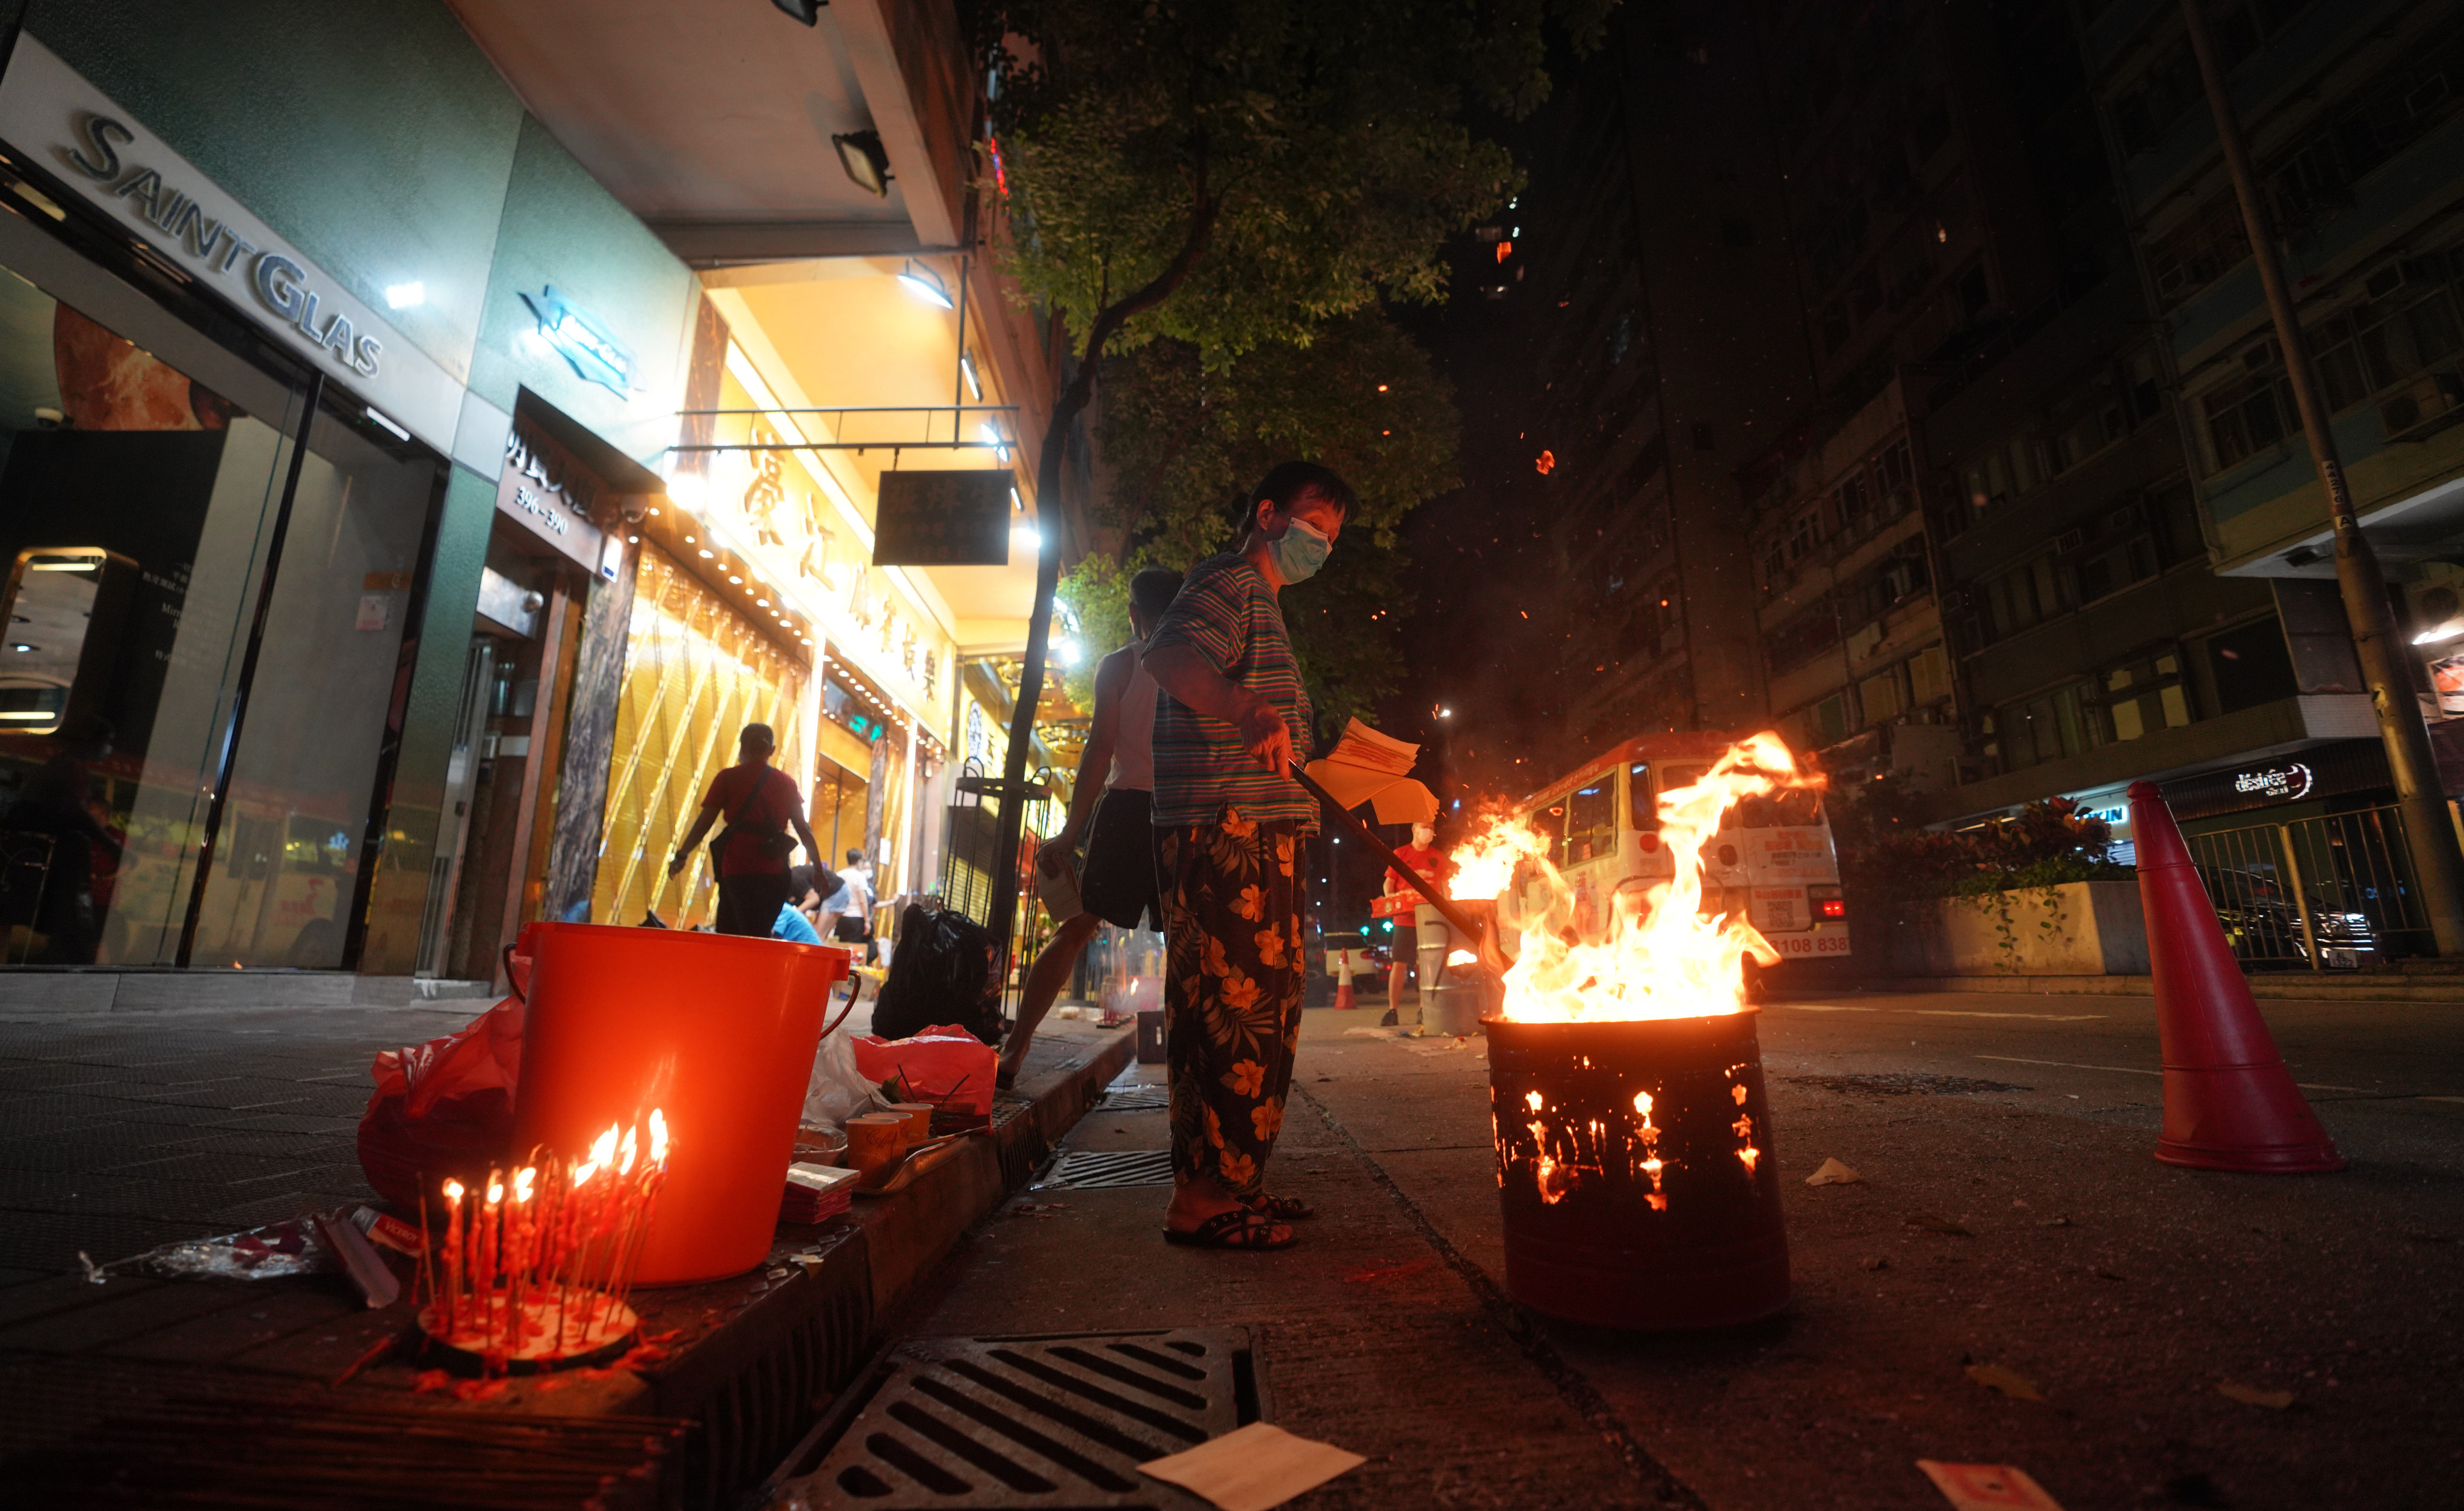 It is common in Chinese communities to see people, such as these men in Wan Chai, Hong Kong, burning paper offerings in the street during the Hungry Ghost Festival – to help wandering ghosts when they return to the afterlife. Photo: Winson Wong